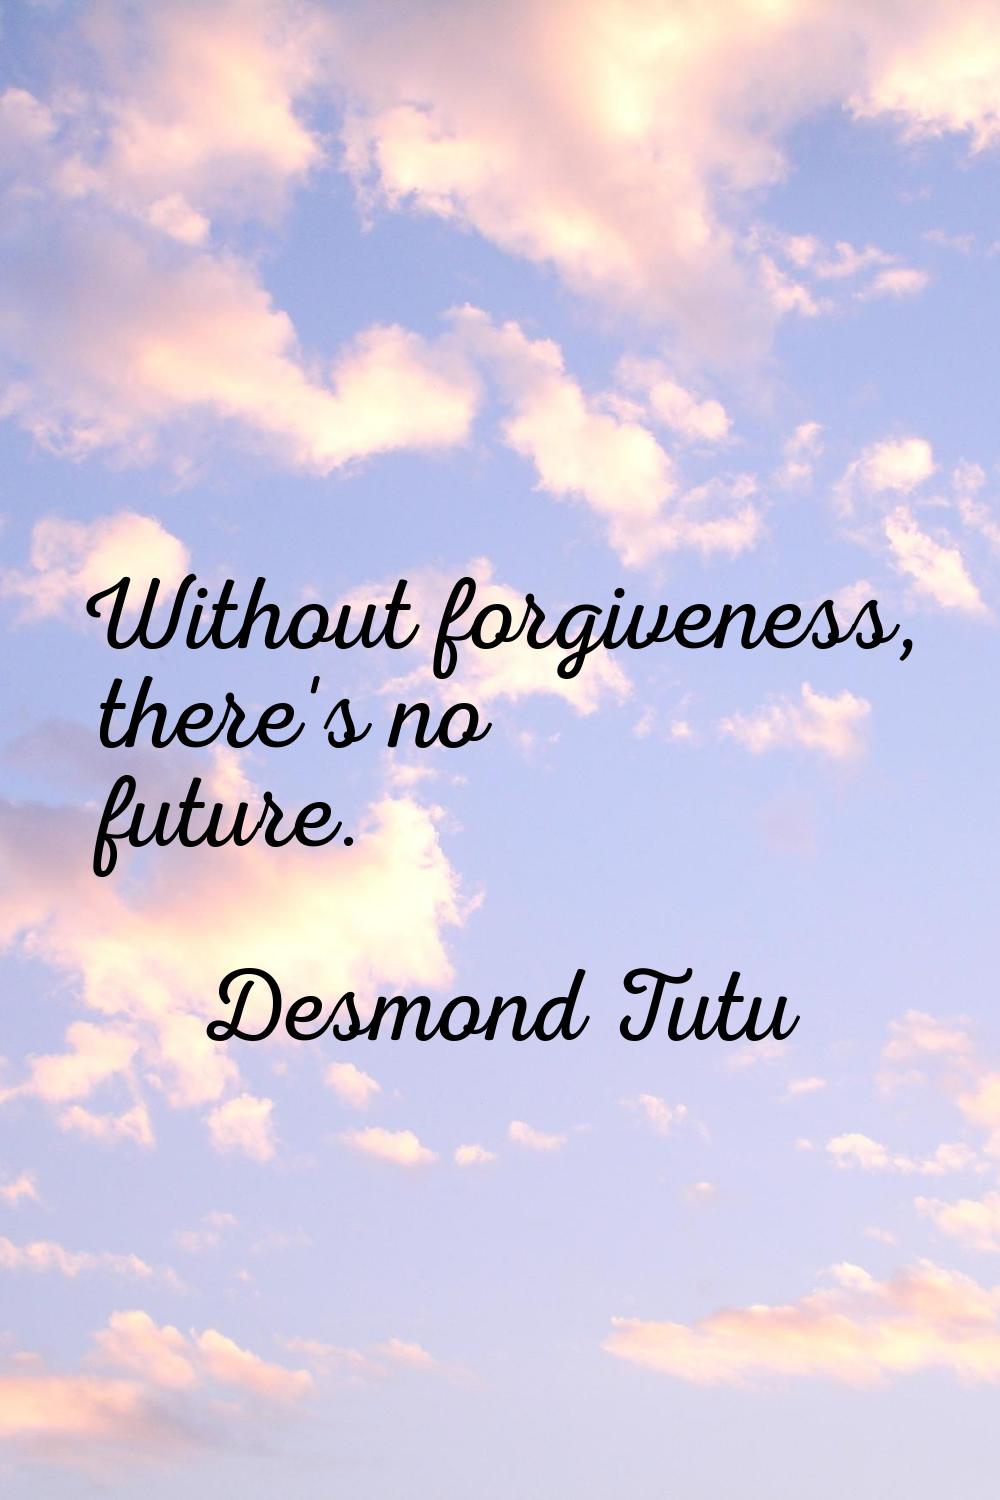 Without forgiveness, there's no future.